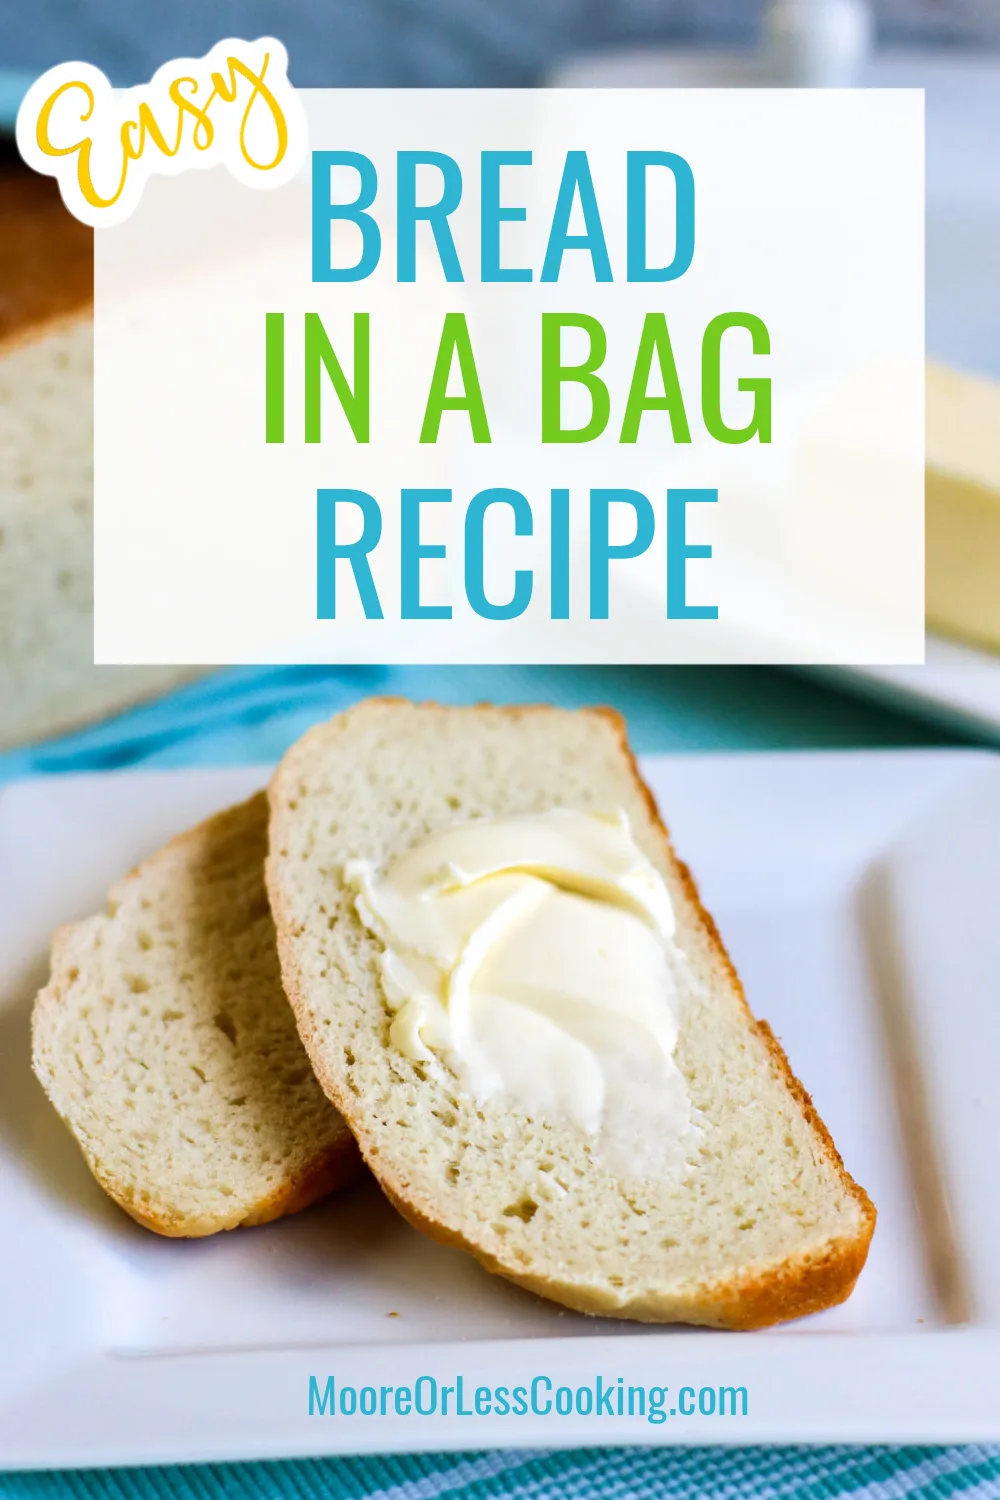 Bread In A Bag-Homemade bread is made easy with this recipe that starts in a Ziploc bag and finishes as a fragrant, warm, and golden loaf in the oven. It's a mess-free way to make bread that turns out deliciously perfect every time! via @Mooreorlesscook